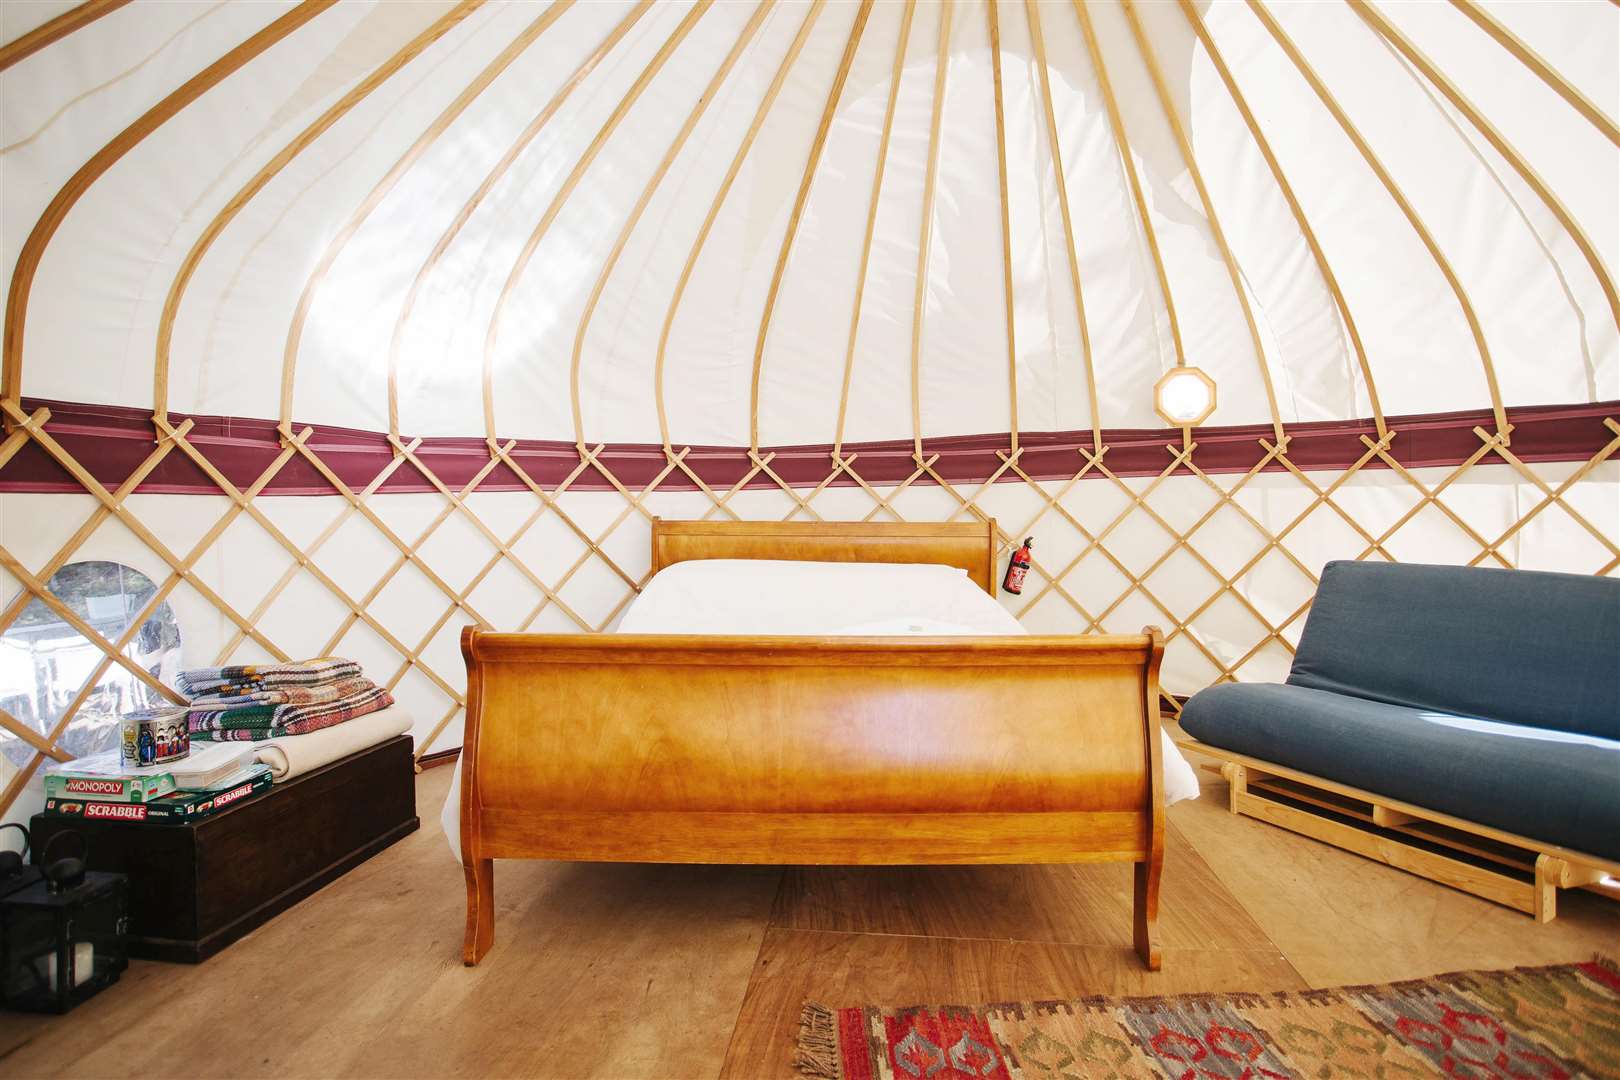 This yurt is on a working dairy farm